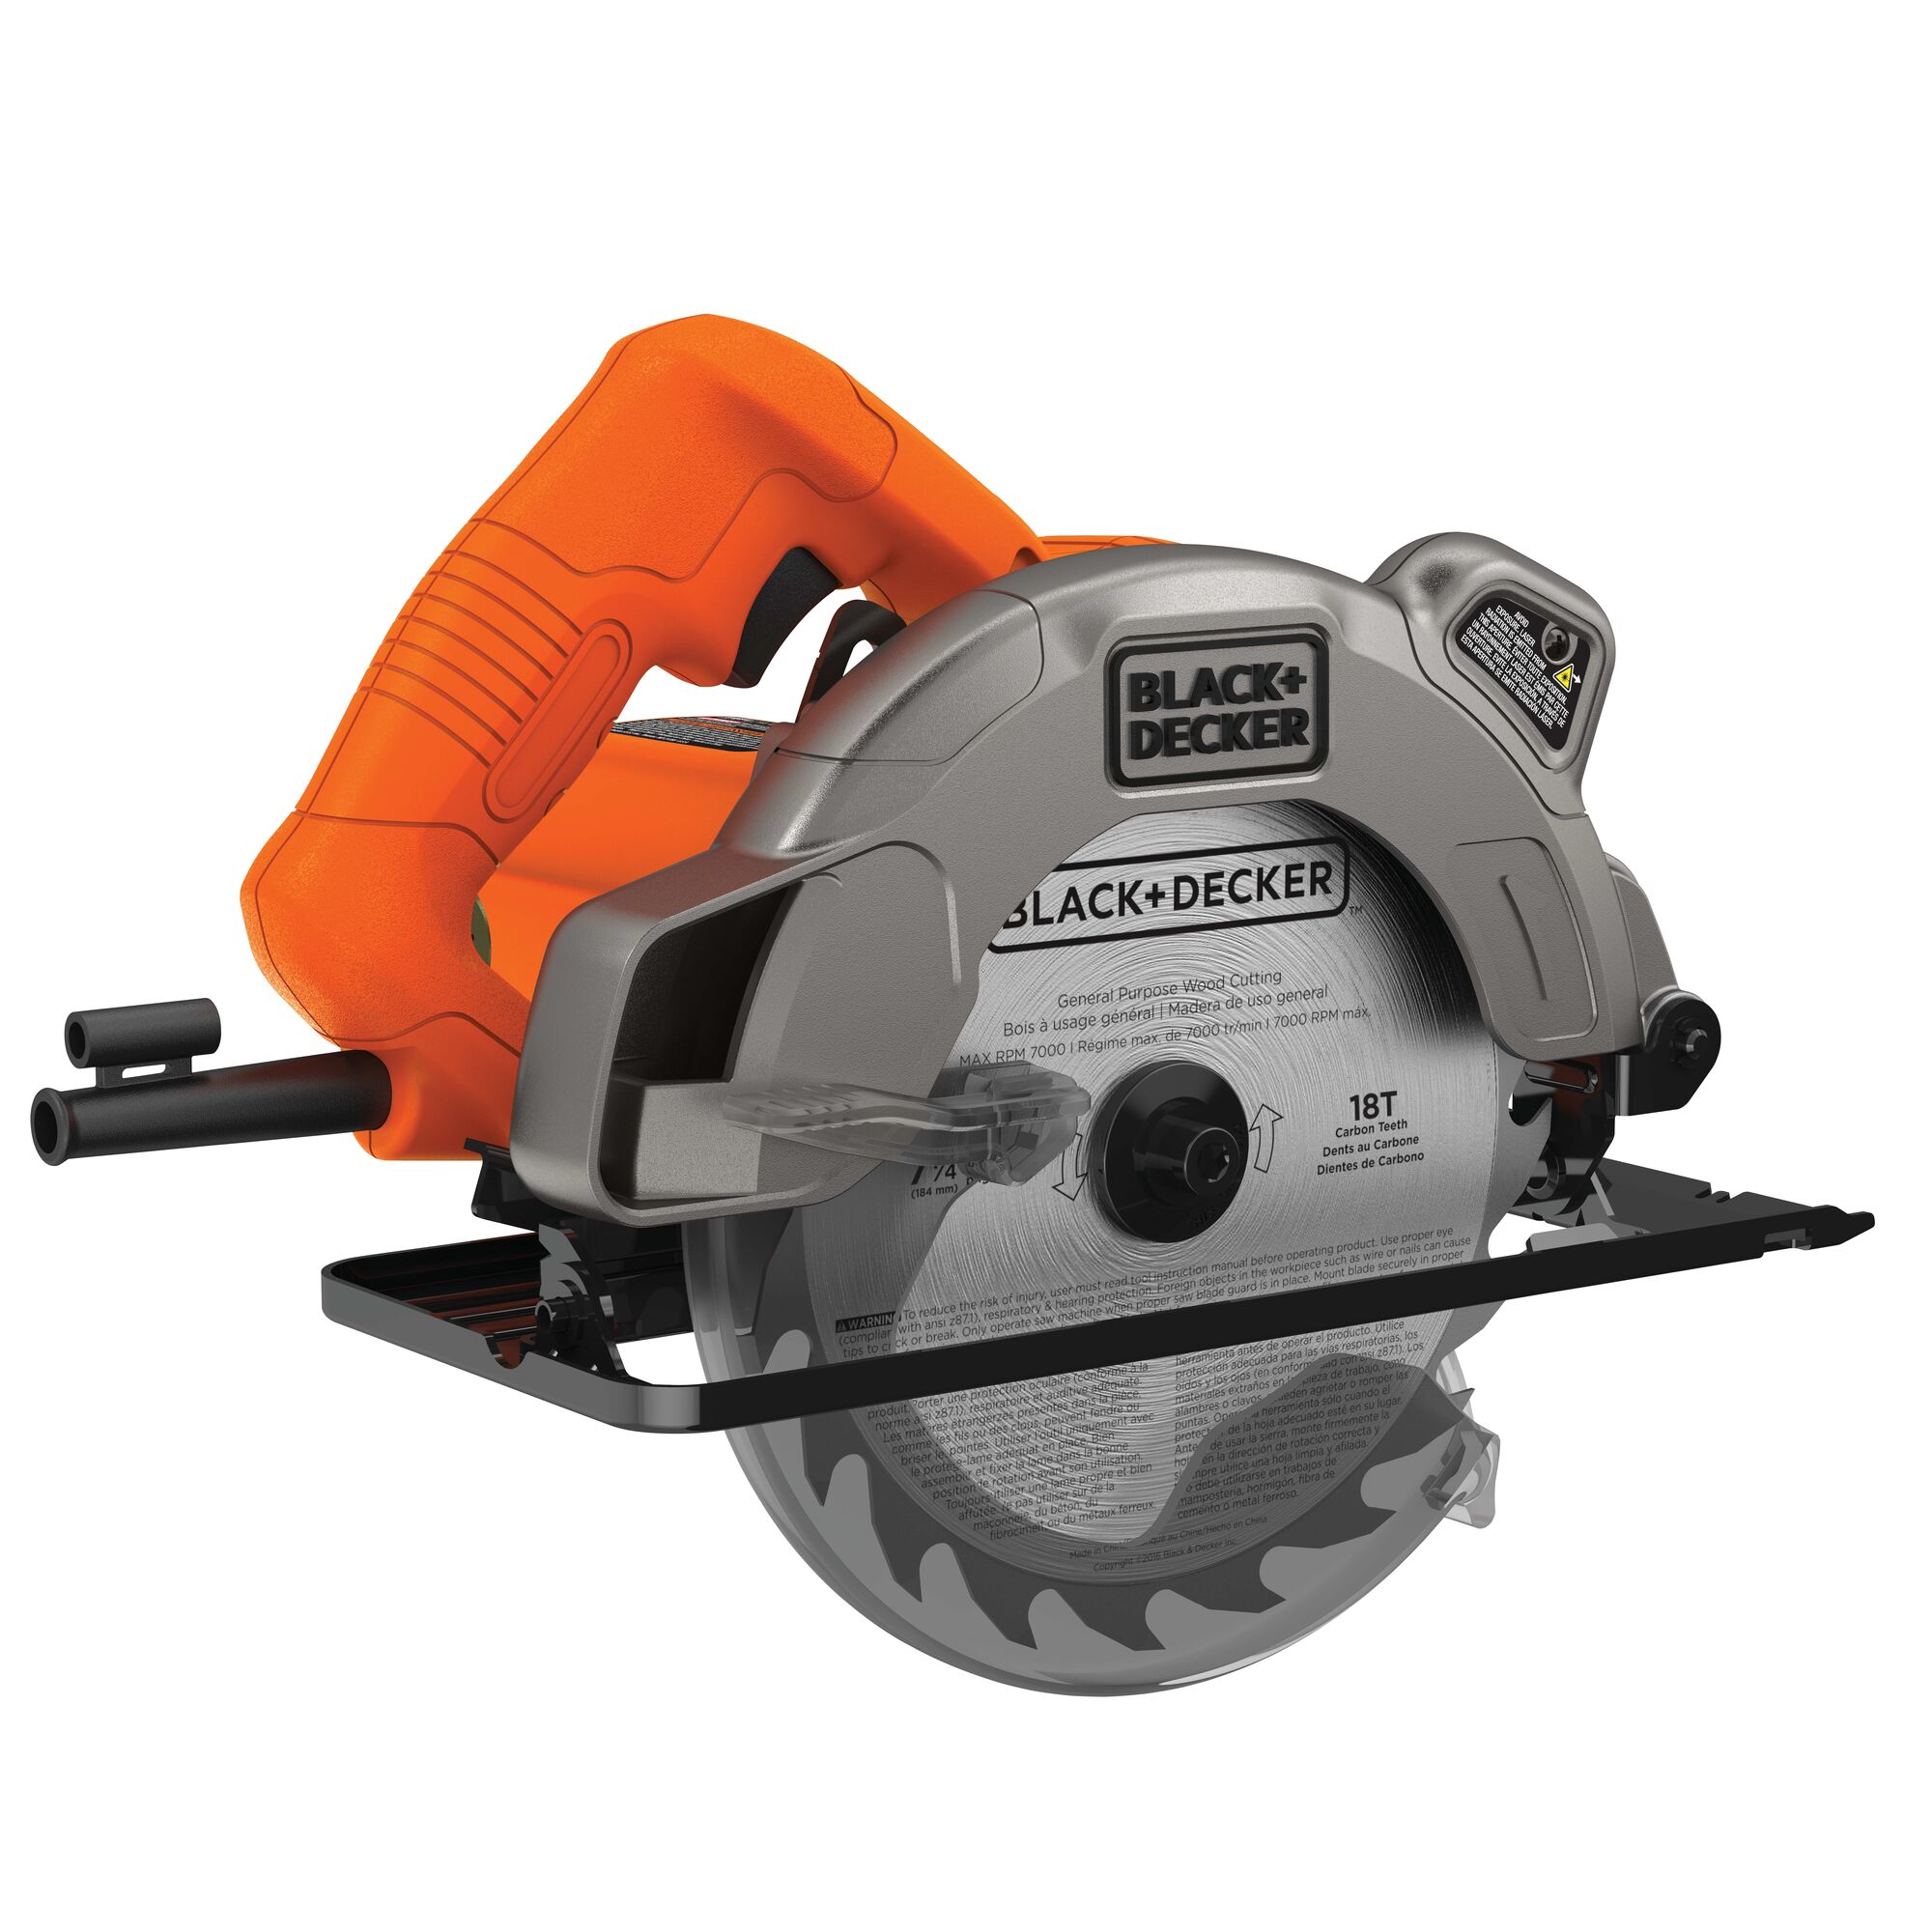 Black and decker 7-1/4-Inch Circular Saw With Laser, 13-Amp